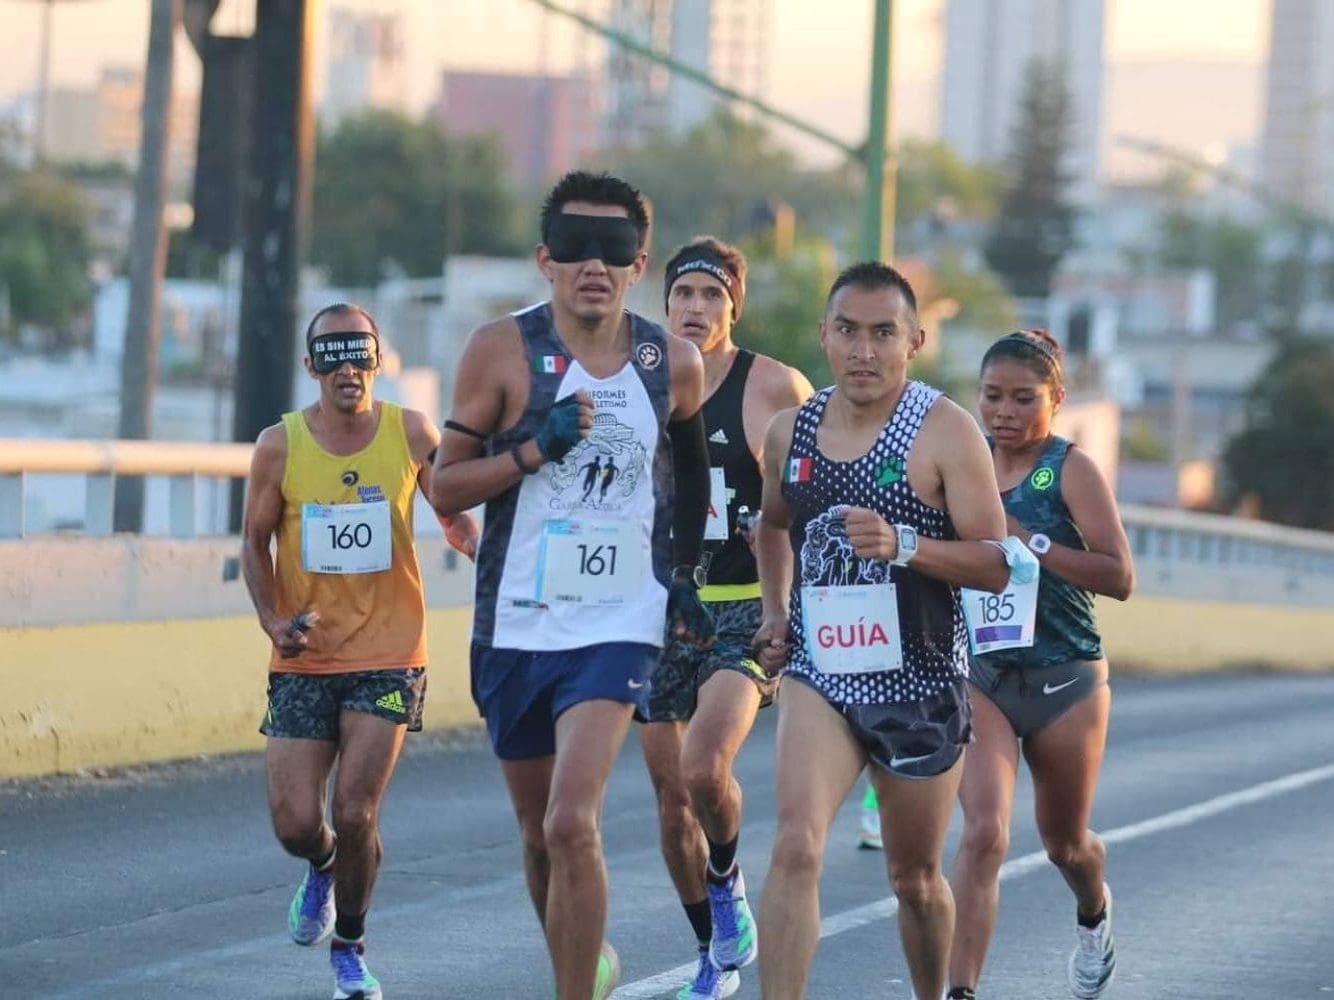 David Juárez runs in a race with the help of a guide